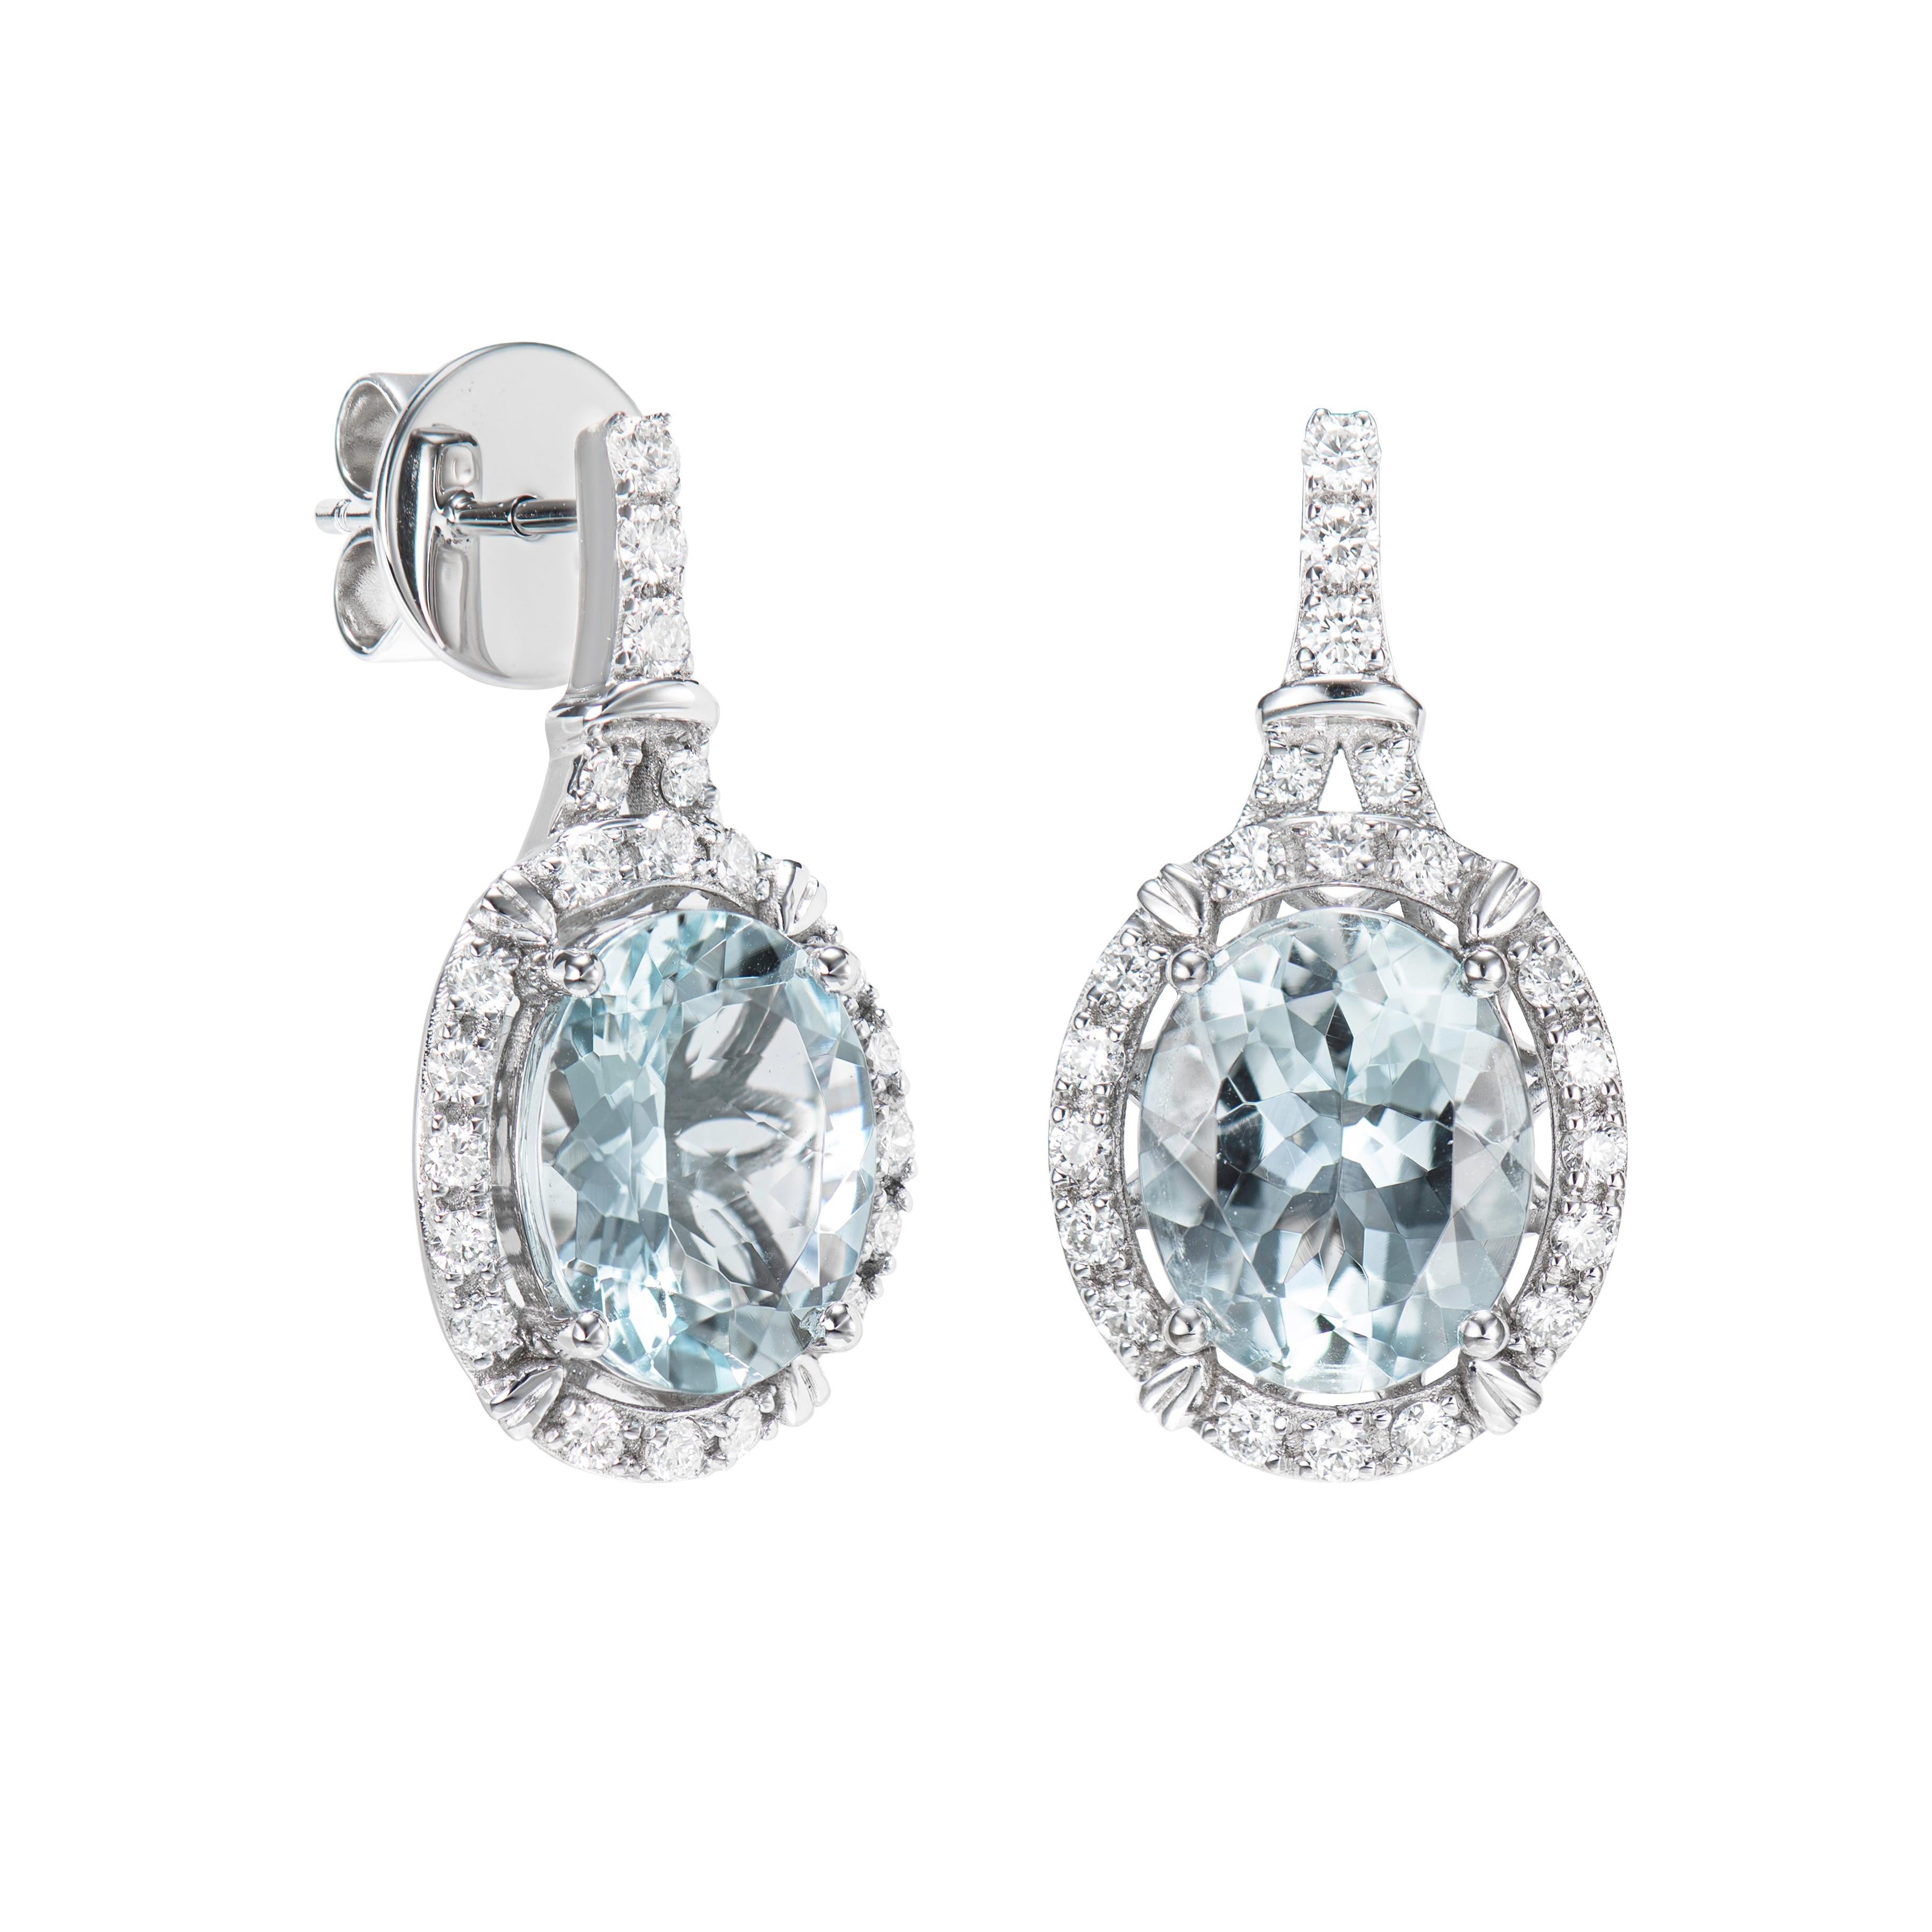 This collection features an array of aquamarines with an icy blue hue that is as cool as it gets! Accented with diamonds these Drops Earrings are made in white gold and present a classic yet elegant look. 

Aquamarine and White Diamond Drops Earring